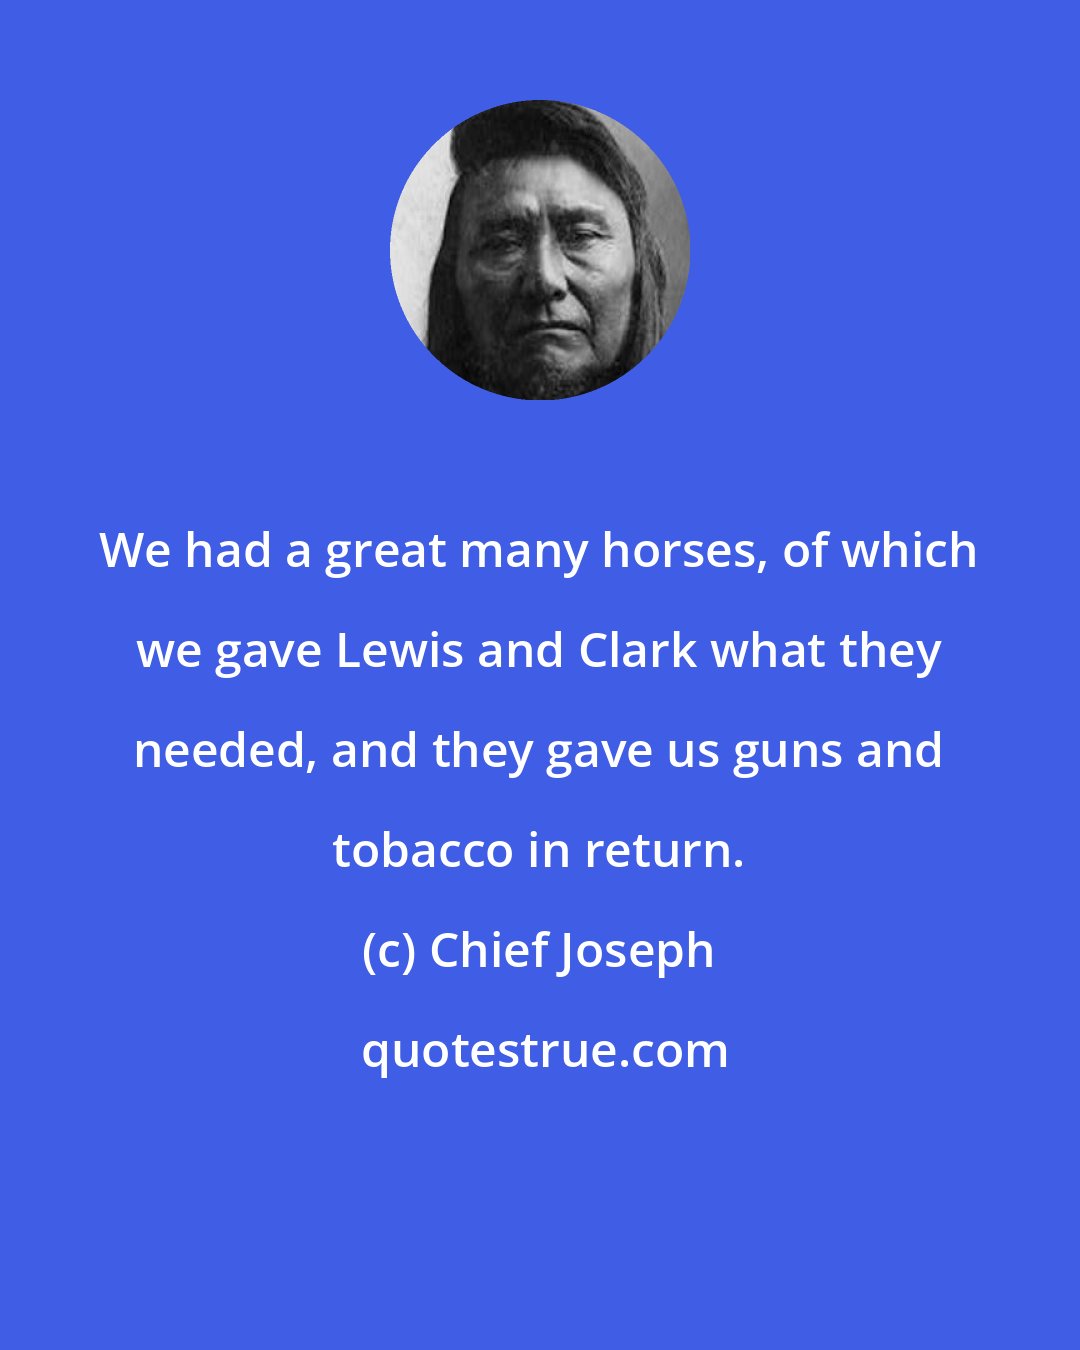 Chief Joseph: We had a great many horses, of which we gave Lewis and Clark what they needed, and they gave us guns and tobacco in return.